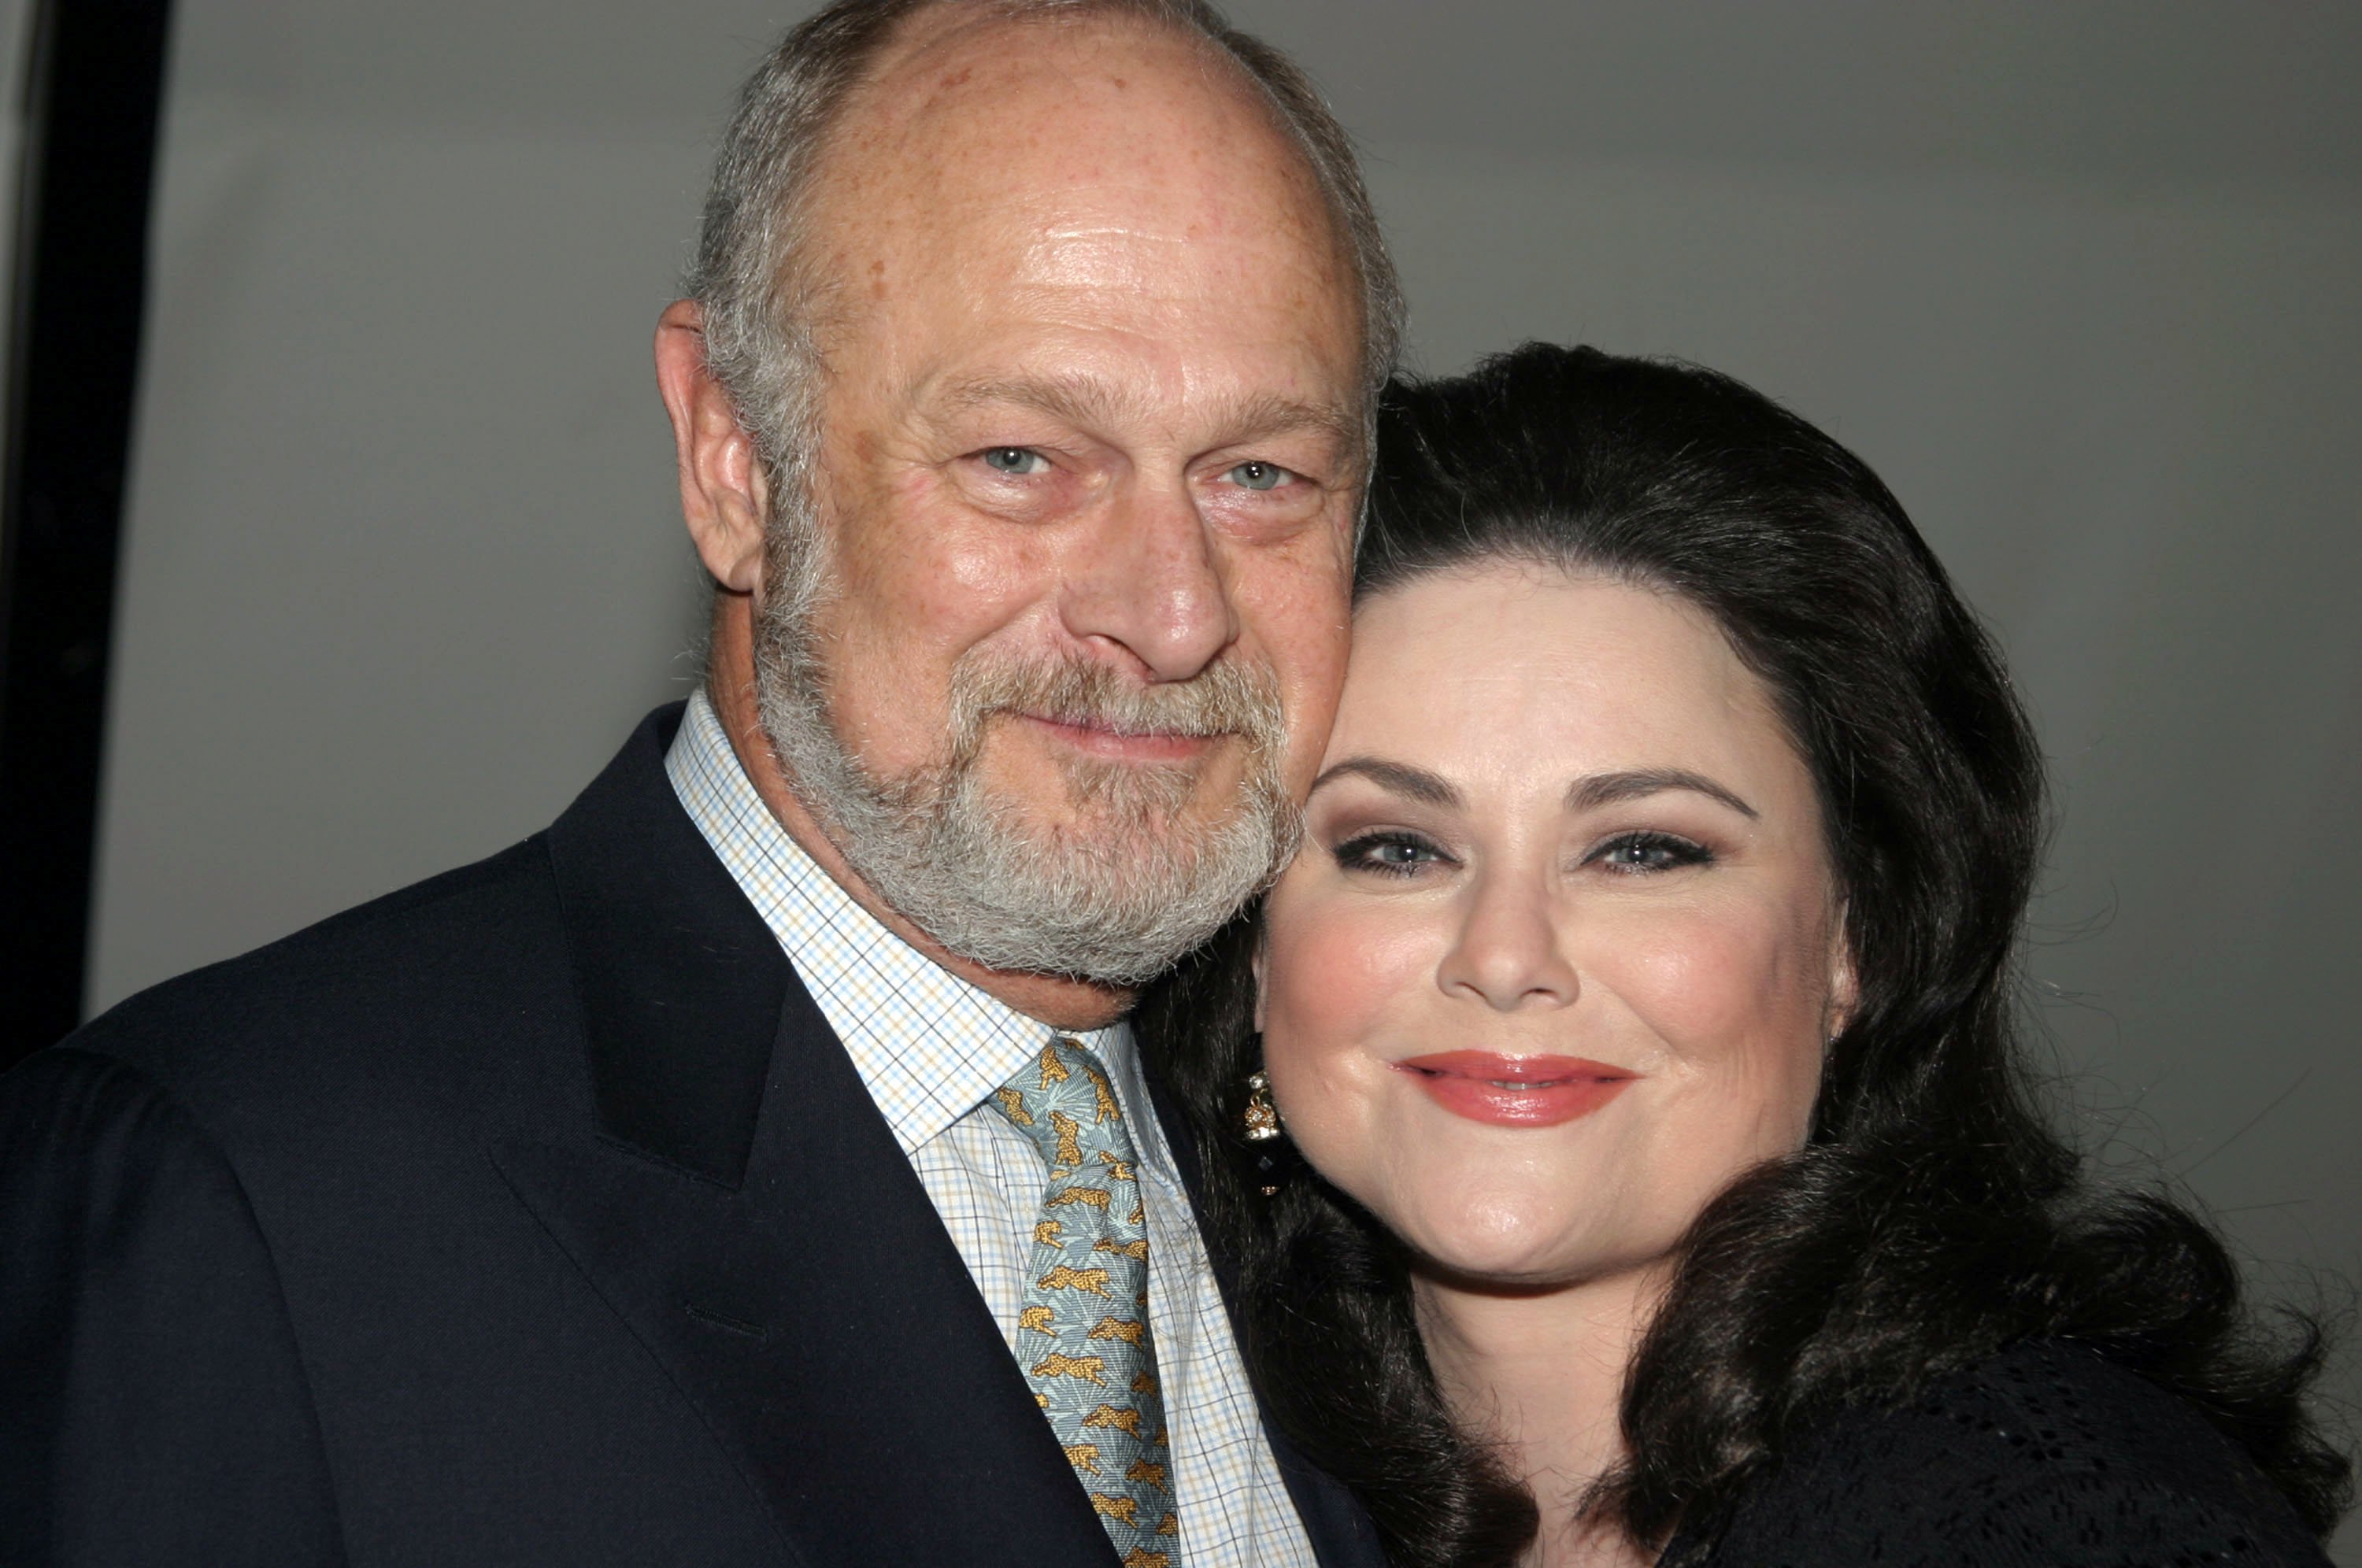 Gerald McRaney and Delta Burke during Delta Burke Makes Broadway Debut in "Thoroughly Modern Millie" and After Party at The Marquis Theater in New York City, New York, United States, 2003 | Source: Getty Images